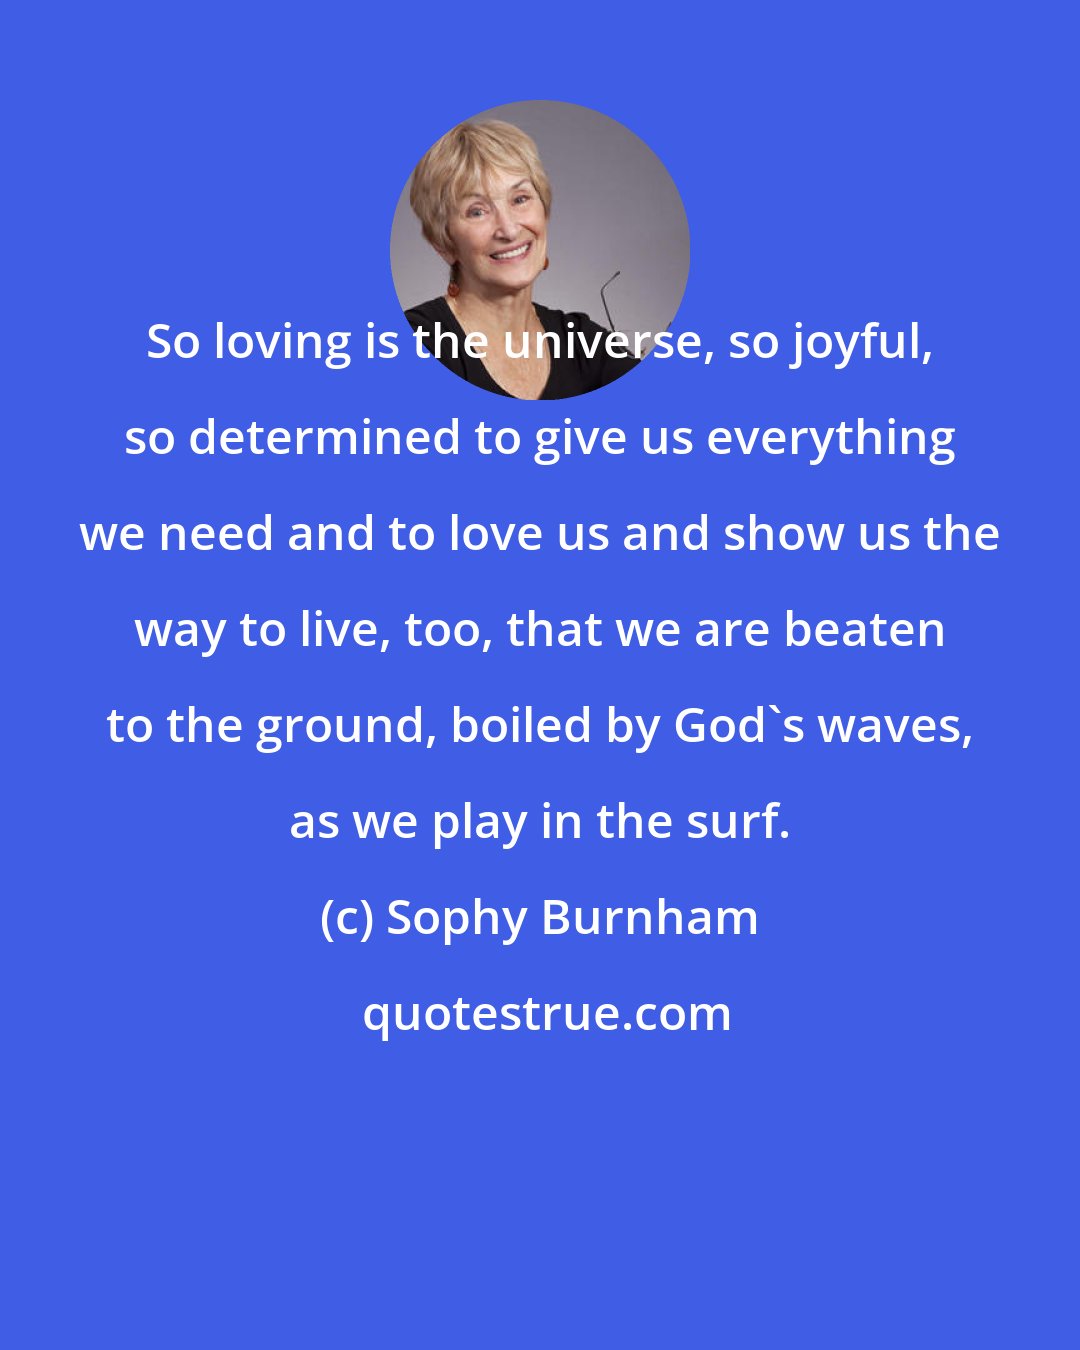 Sophy Burnham: So loving is the universe, so joyful, so determined to give us everything we need and to love us and show us the way to live, too, that we are beaten to the ground, boiled by God's waves, as we play in the surf.